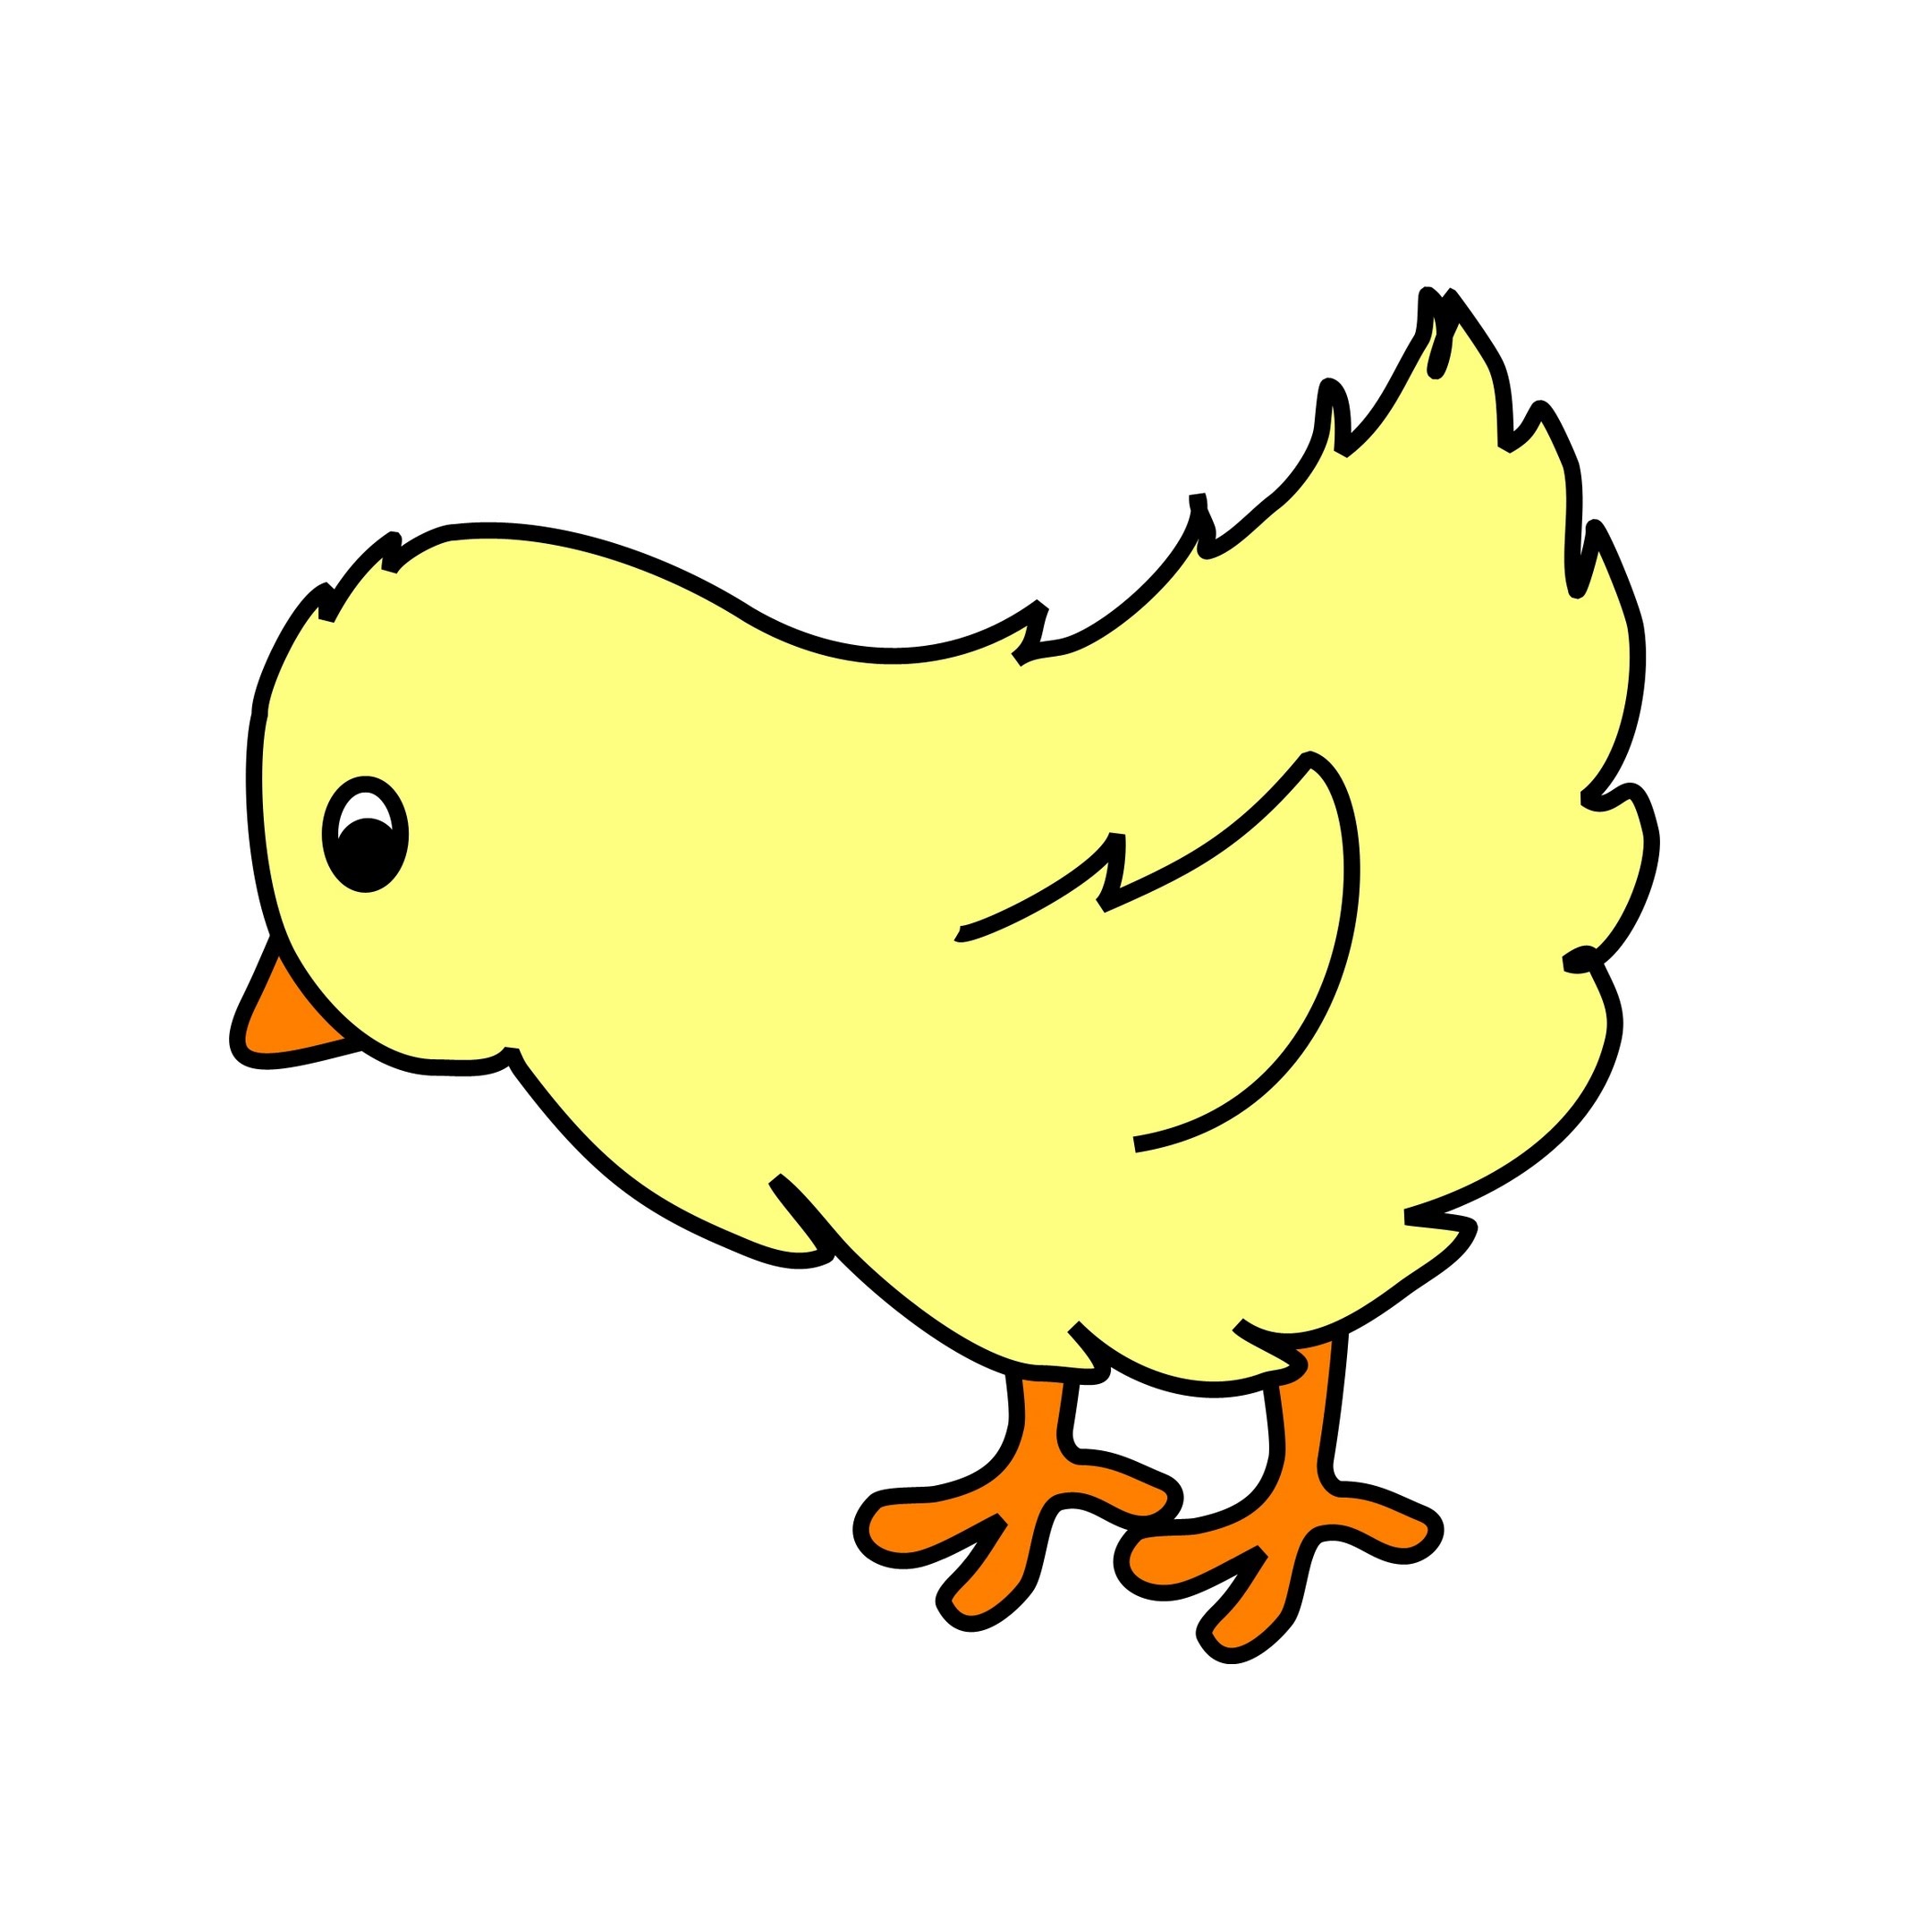 chick image clipart